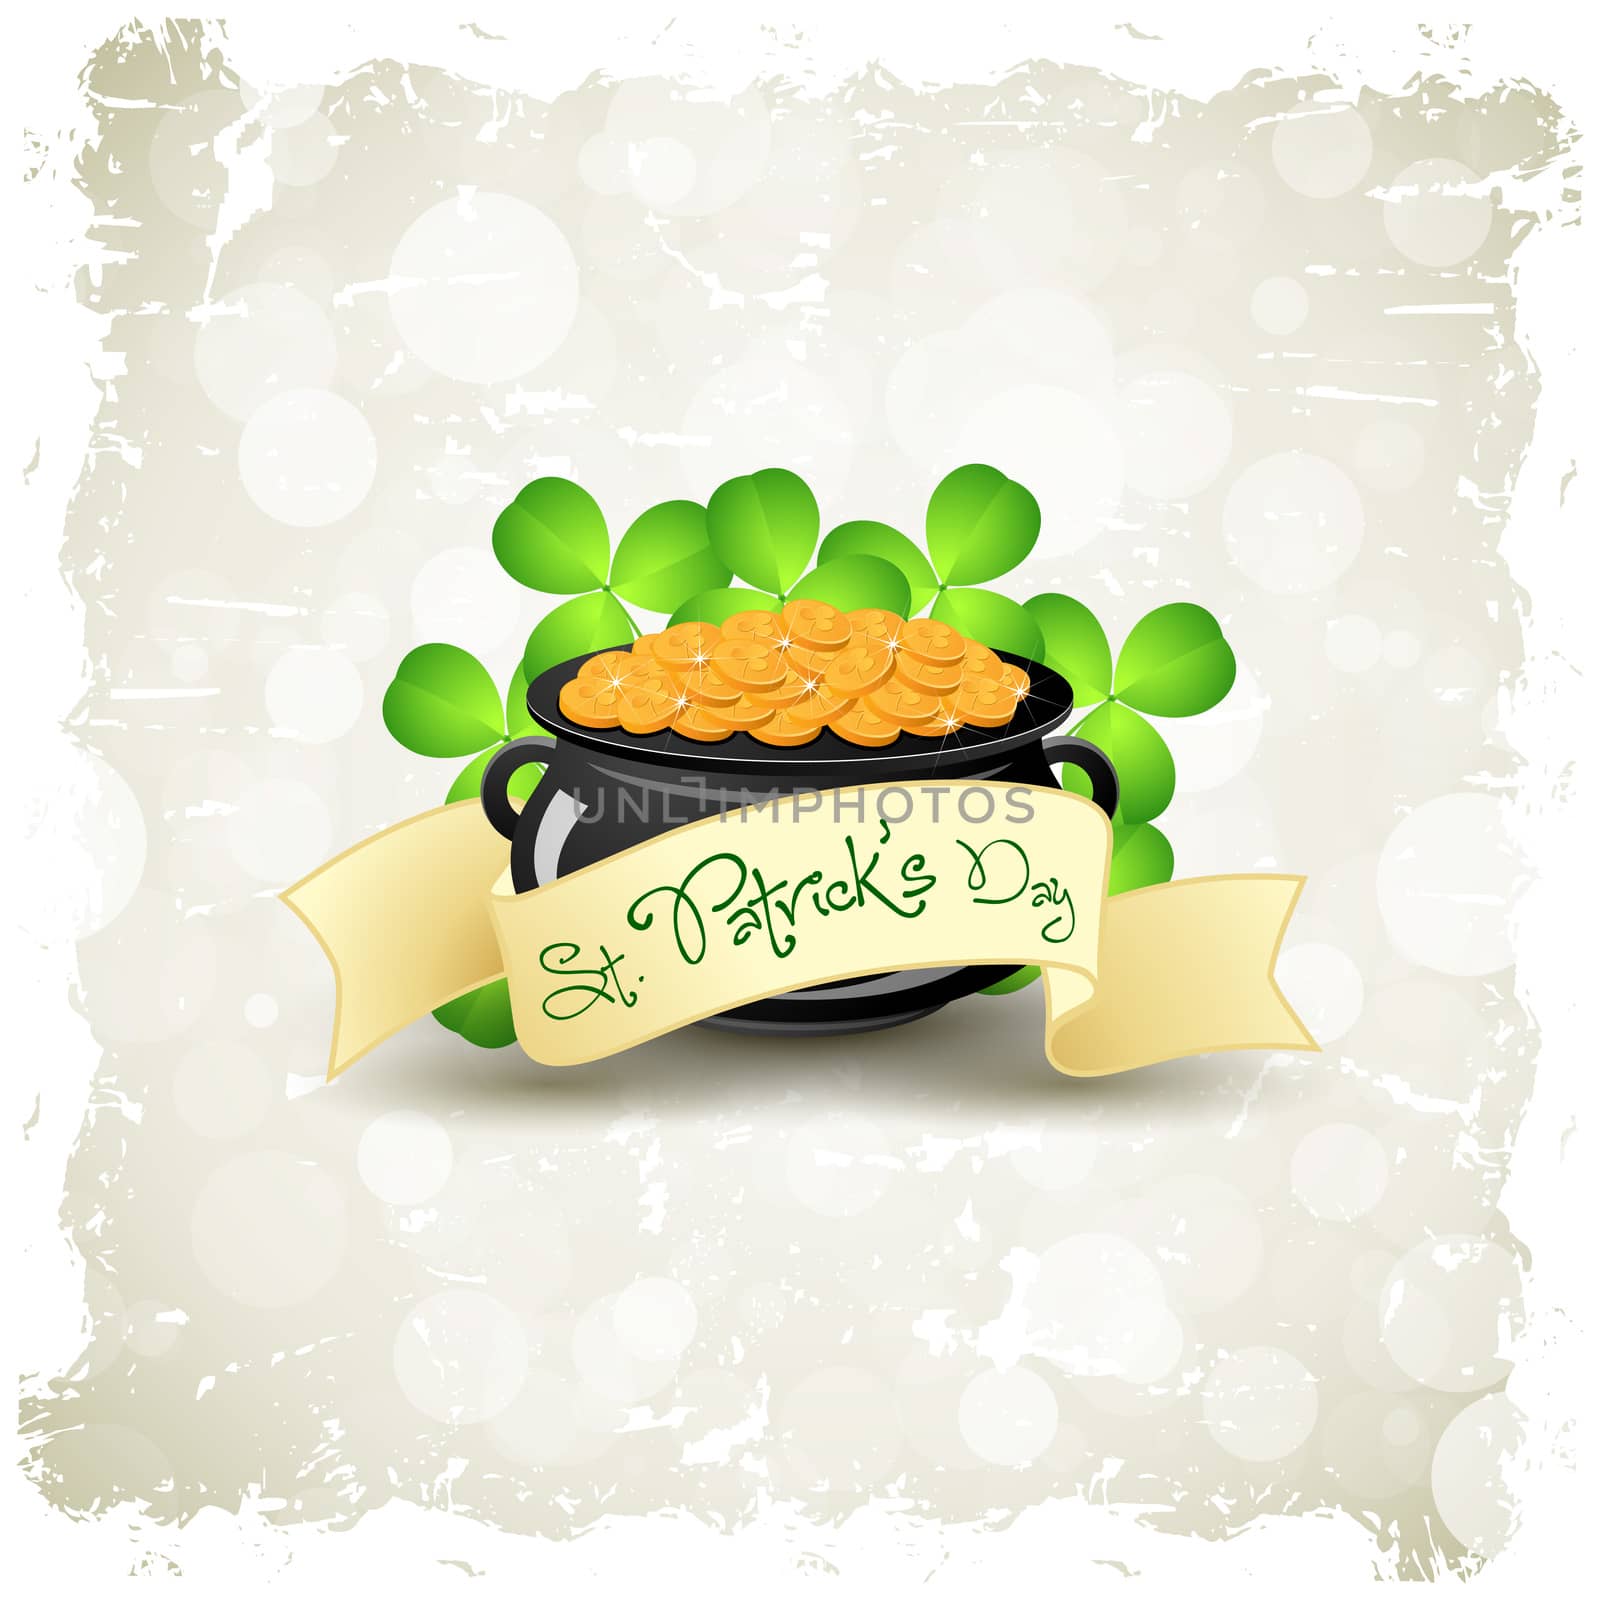 Grungy Patricks Day Card. Cauldron with Gold Coins and Shamrock